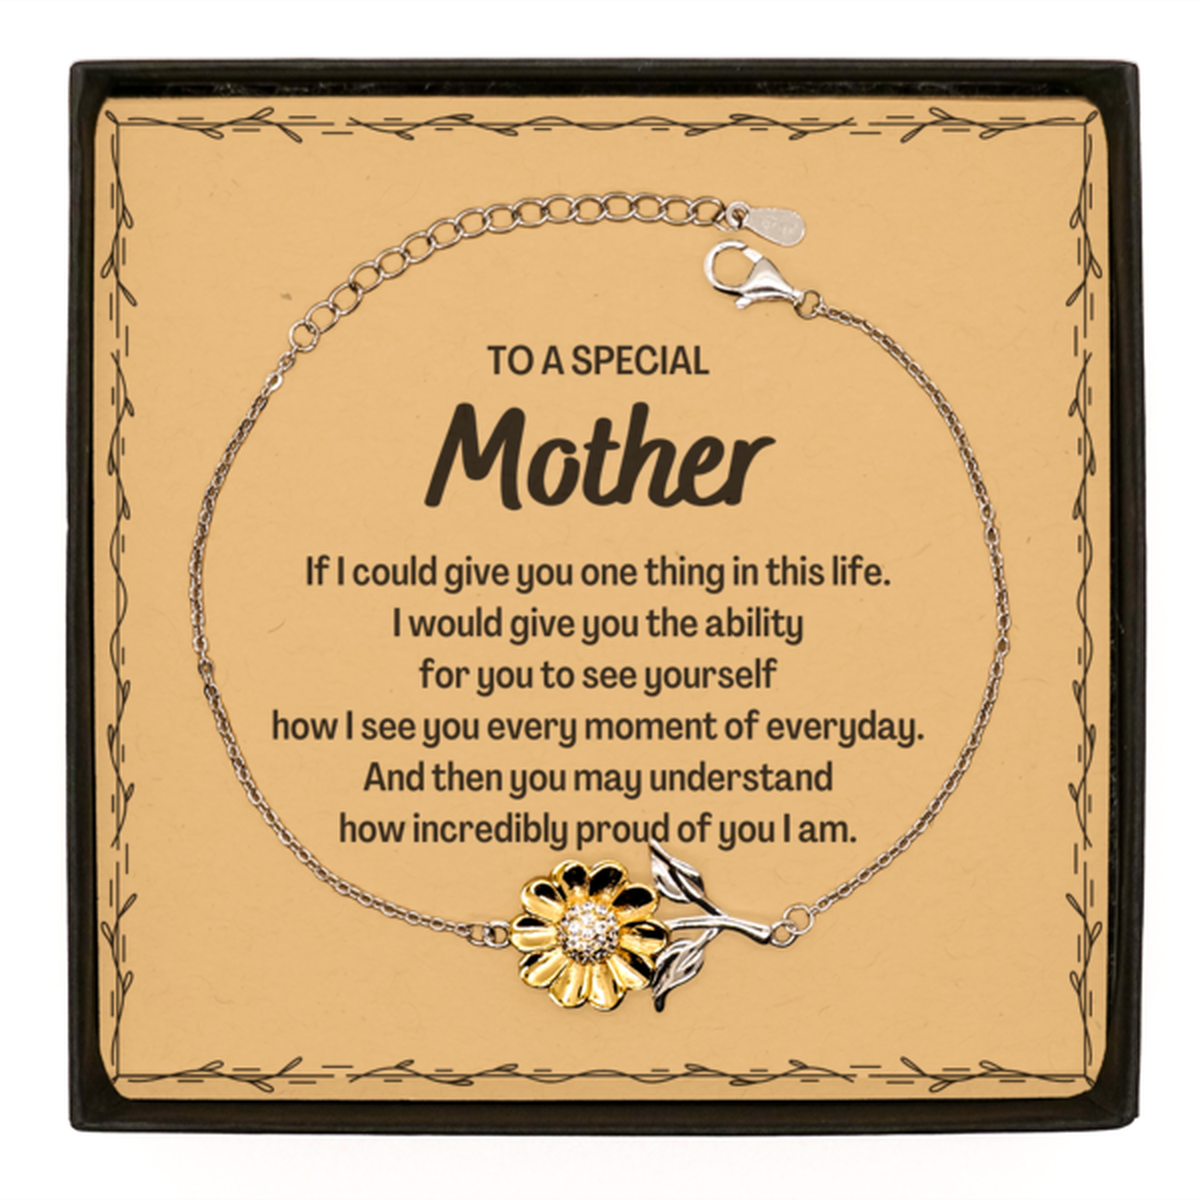 To My Mother Sunflower Bracelet, Gifts For Mother Message Card, Inspirational Gifts for Christmas Birthday, Epic Gifts for Mother To A Special Mother how incredibly proud of you I am